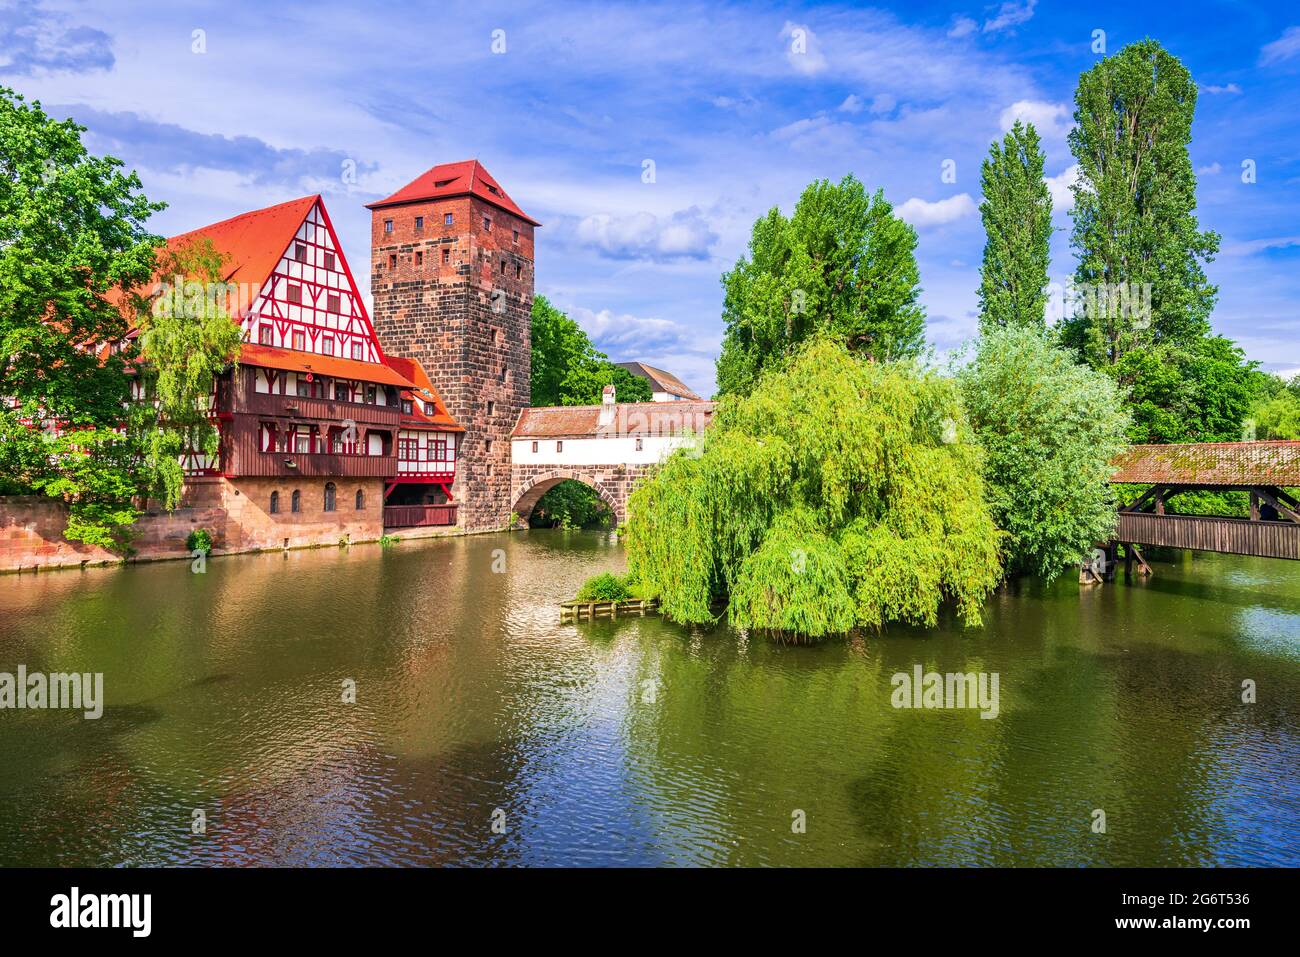 Nuremberg, Germany. Colourful and picturesque view of the half-timbered old houses on the banks of the Pegnitz river. Tourist attractions in Franconia Stock Photo